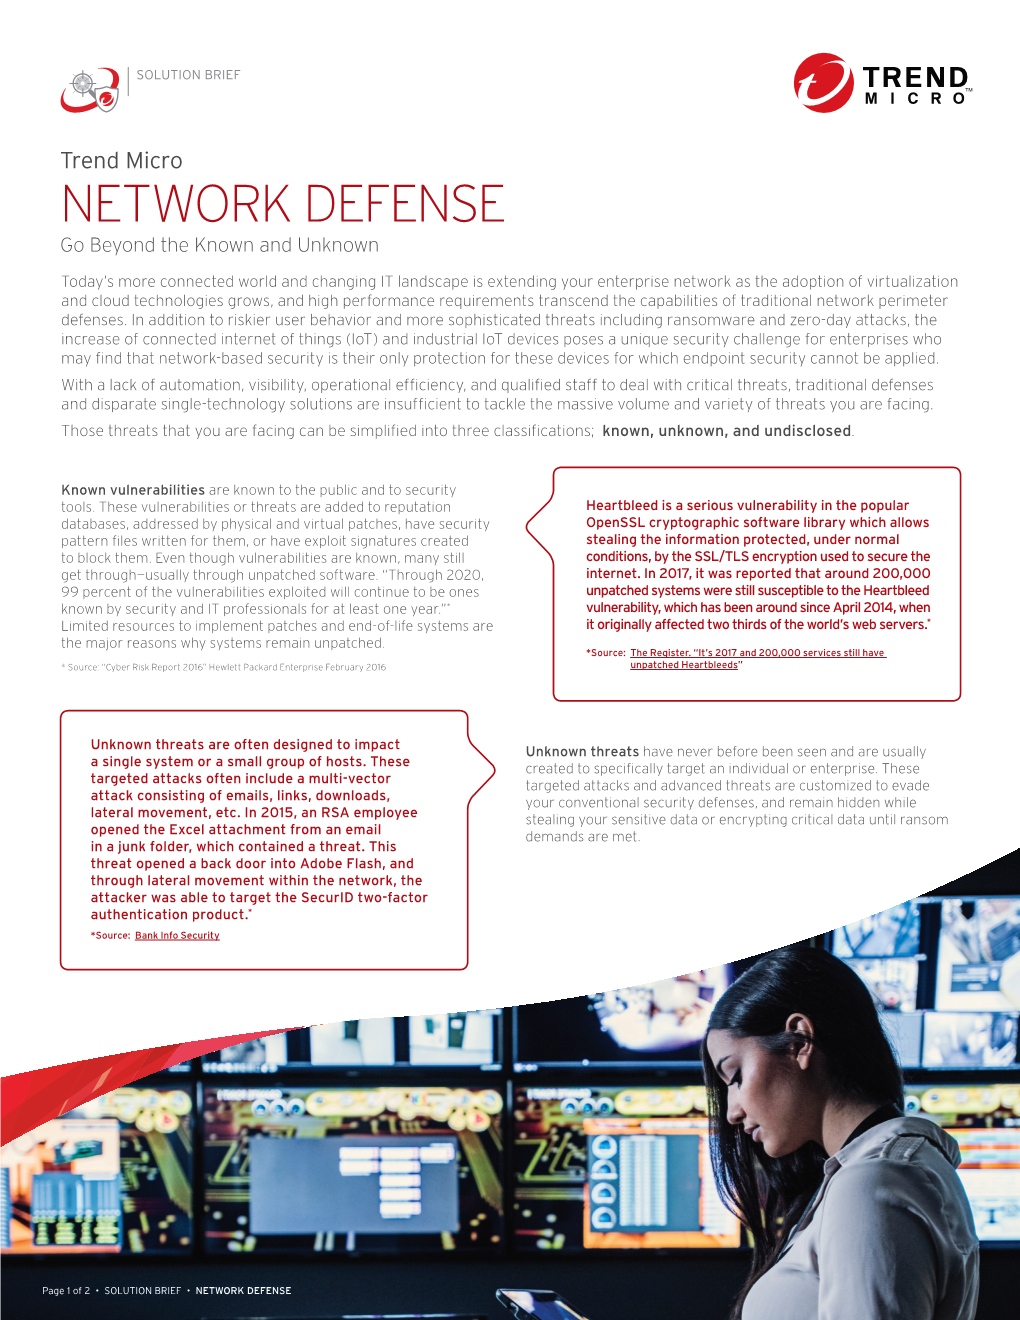 NETWORK DEFENSE Go Beyond the Known and Unknown